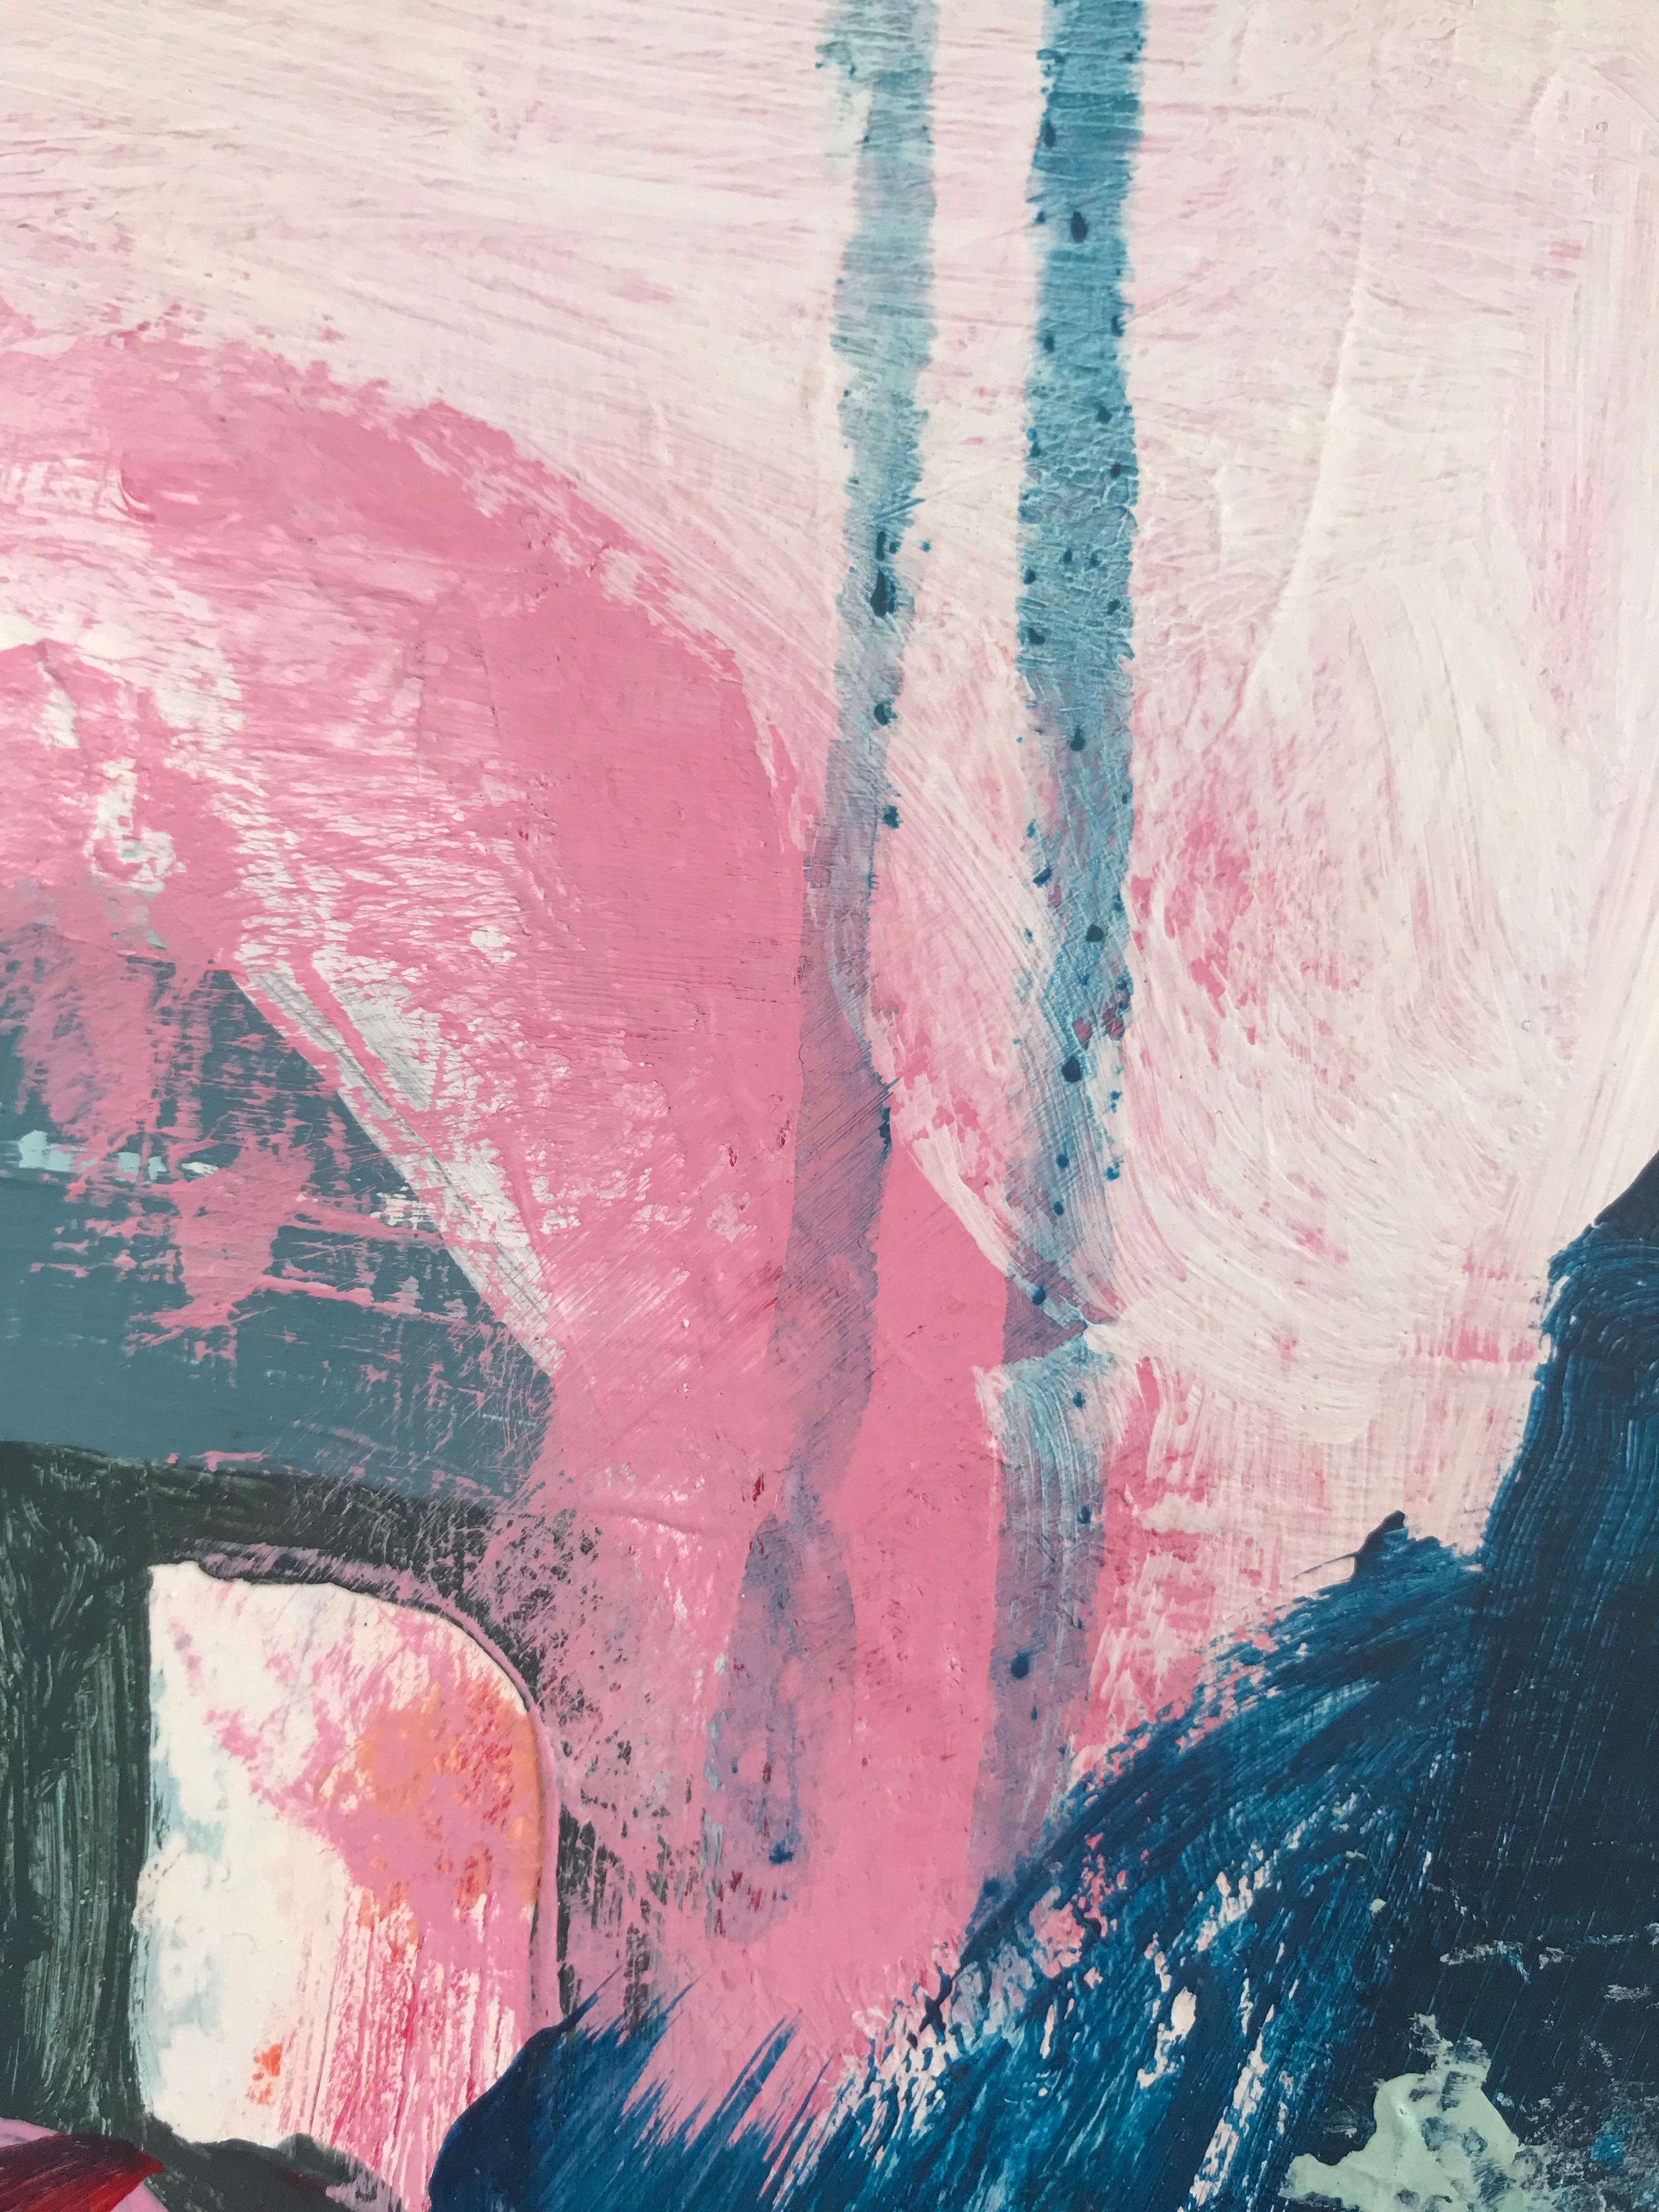 Jimmie James’ “a dirty road” is an abstract 16.5 x 16.5 inch acrylic on watercolor paper painting in a palette of blues and pale sage greens on a pale pinky white background.  Pops of pink and red appear through the open gestural work.  Intentional